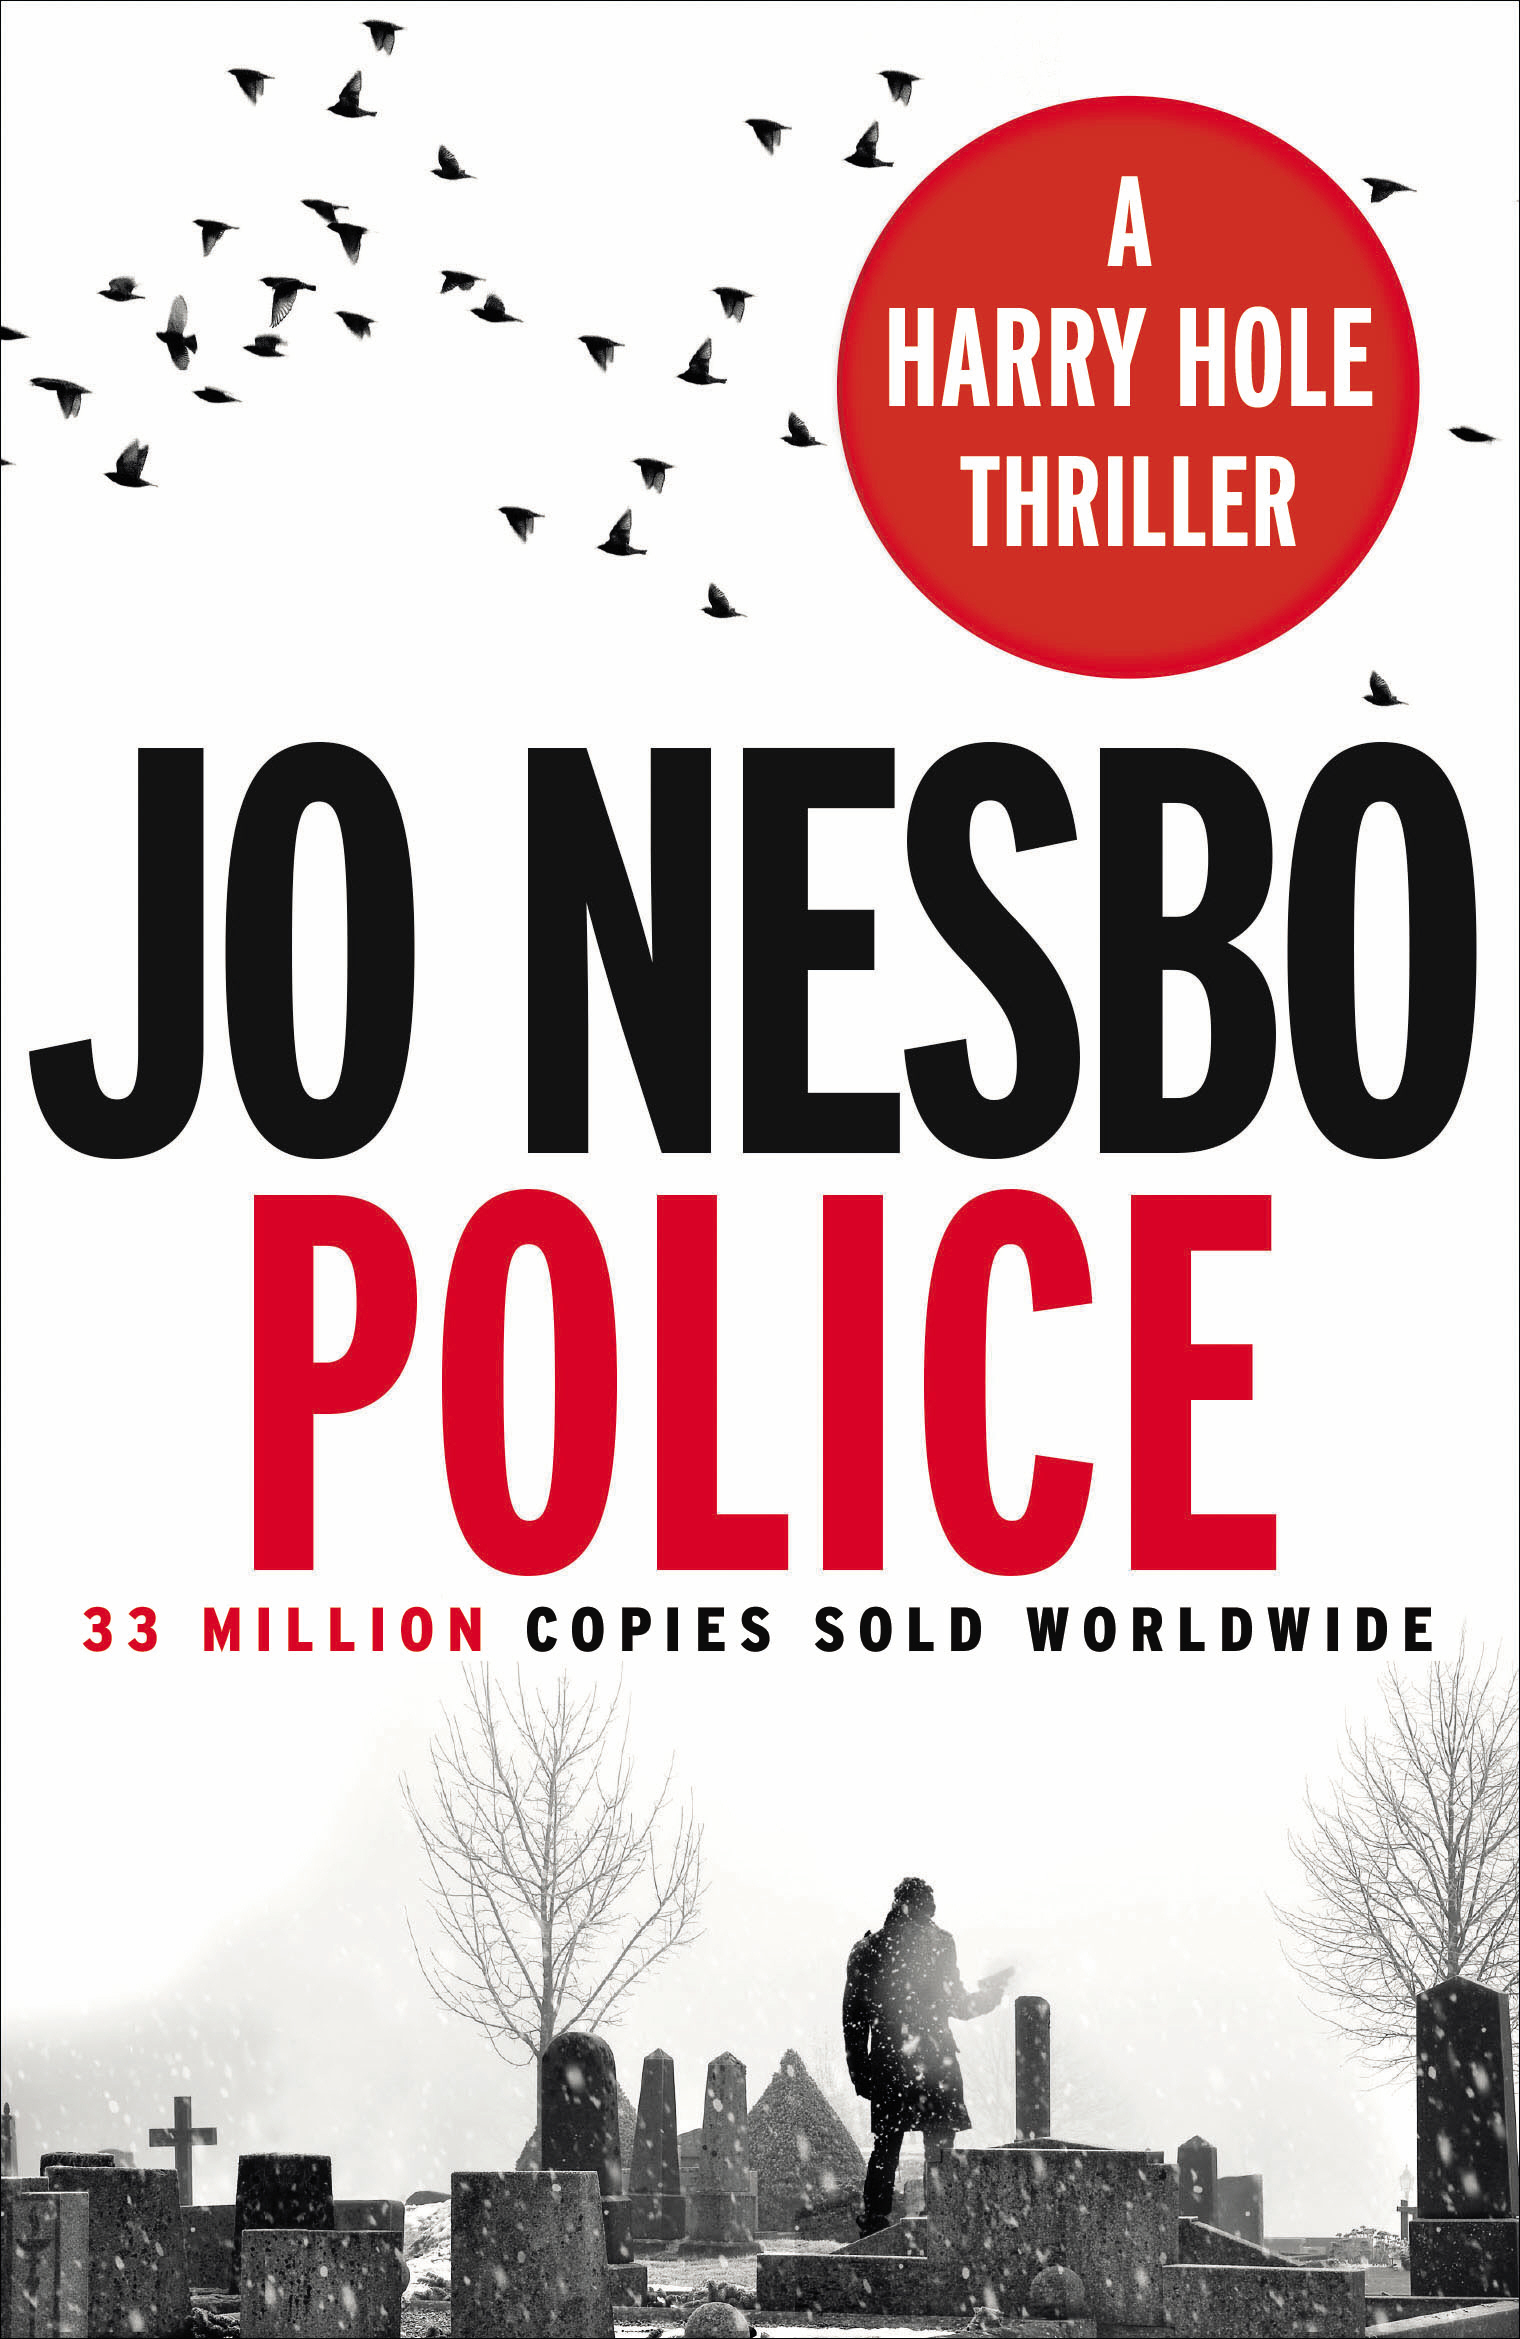 Police A Harry Hole Thriller Jo Nesbo: Paperback Book 2014 RRP 8.99 CLEARANCE XL 5.99